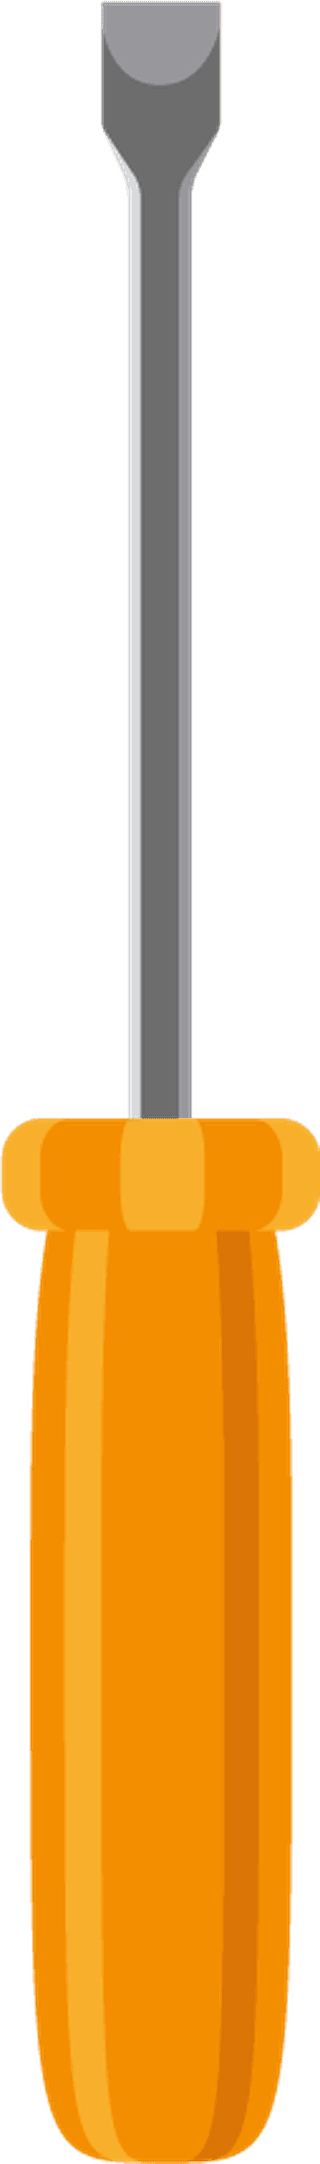 toolsicons-hammer-wrench-screwdriver-spanner-vector-illustration-890632